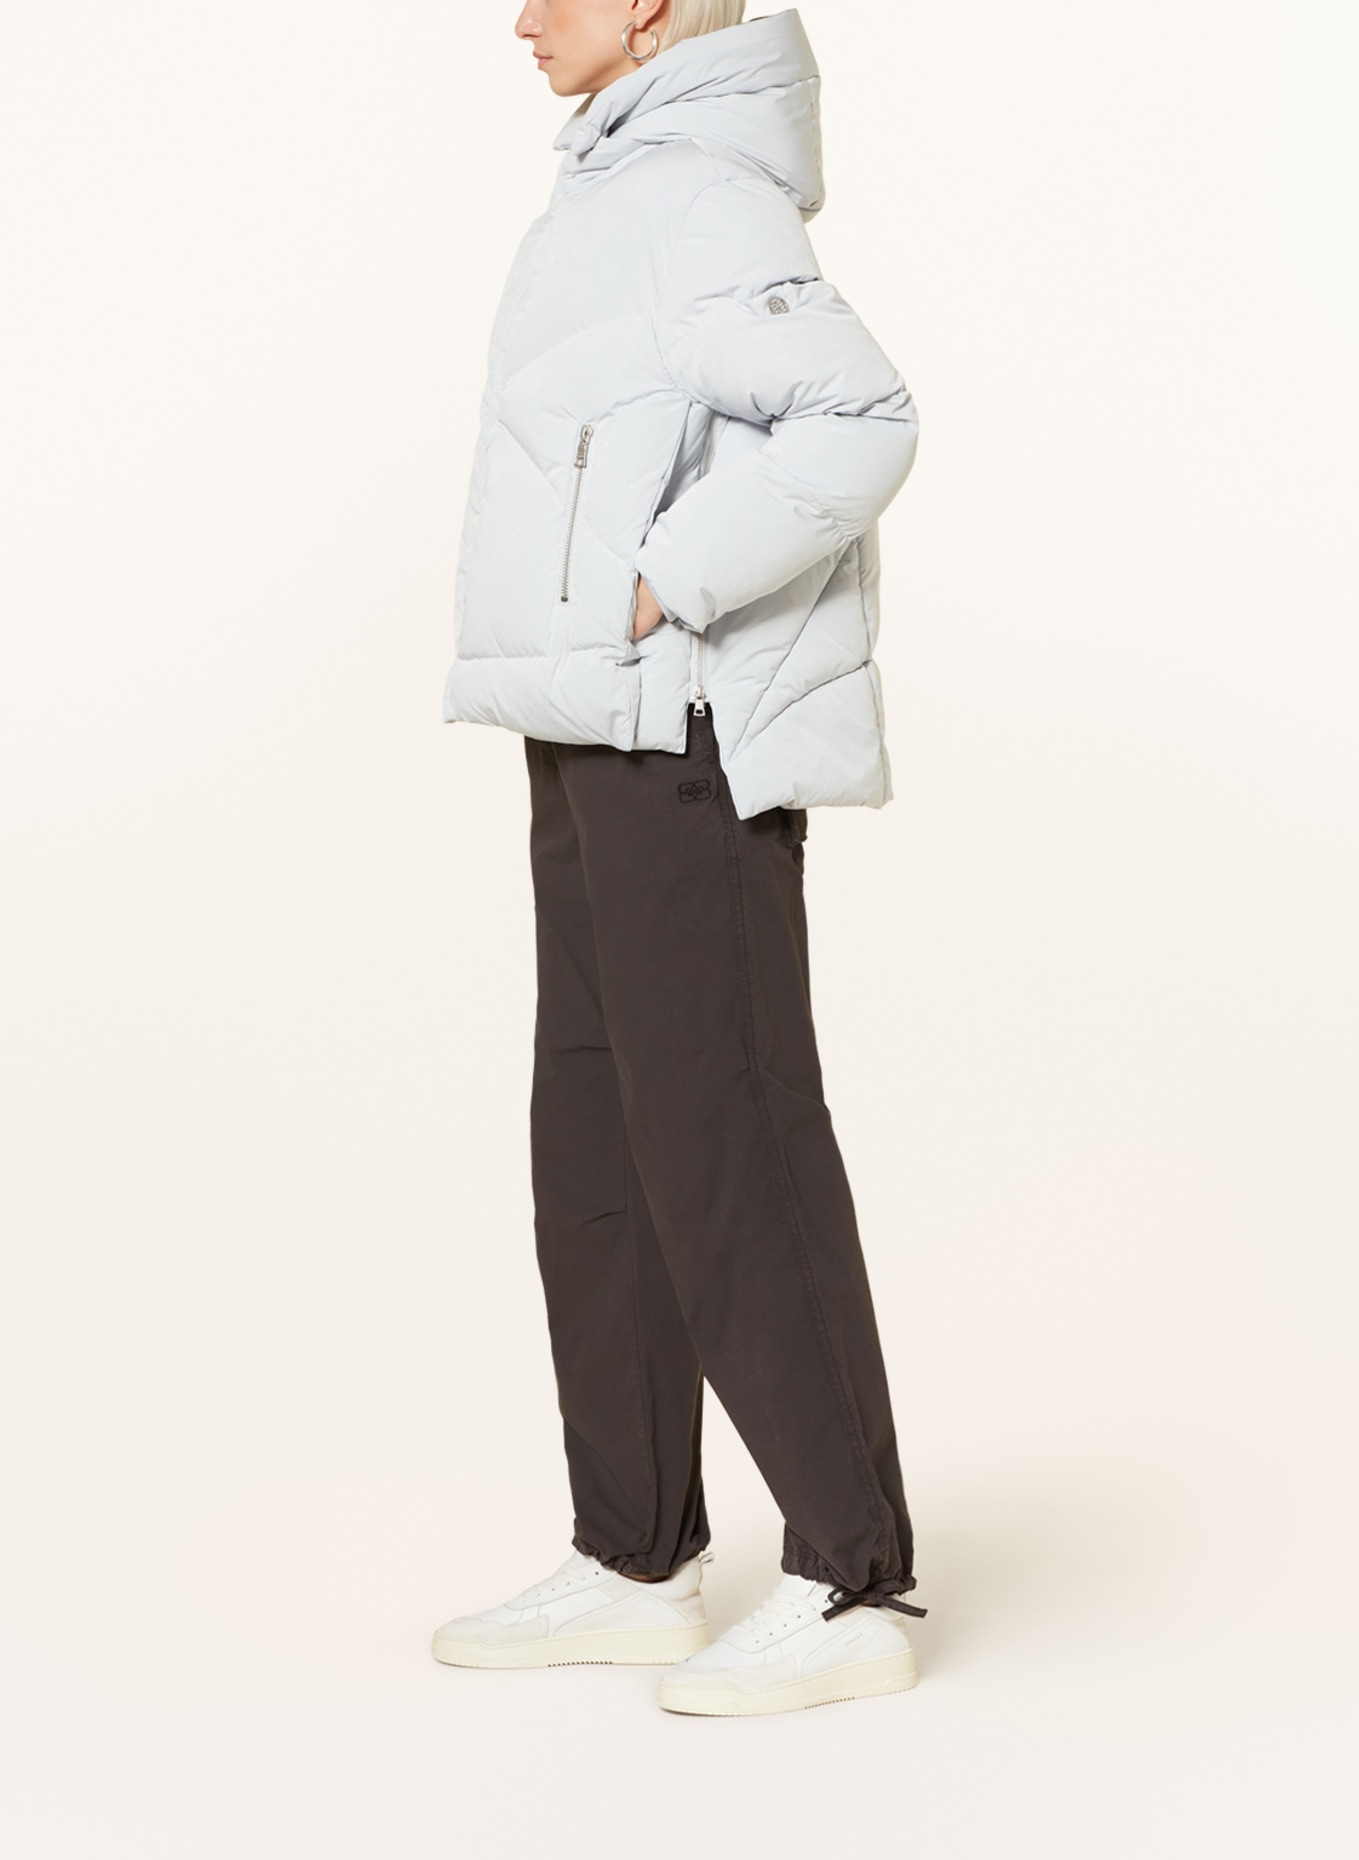 BLONDE No.8 Quilted jacket SIA, Color: LIGHT GRAY (Image 4)